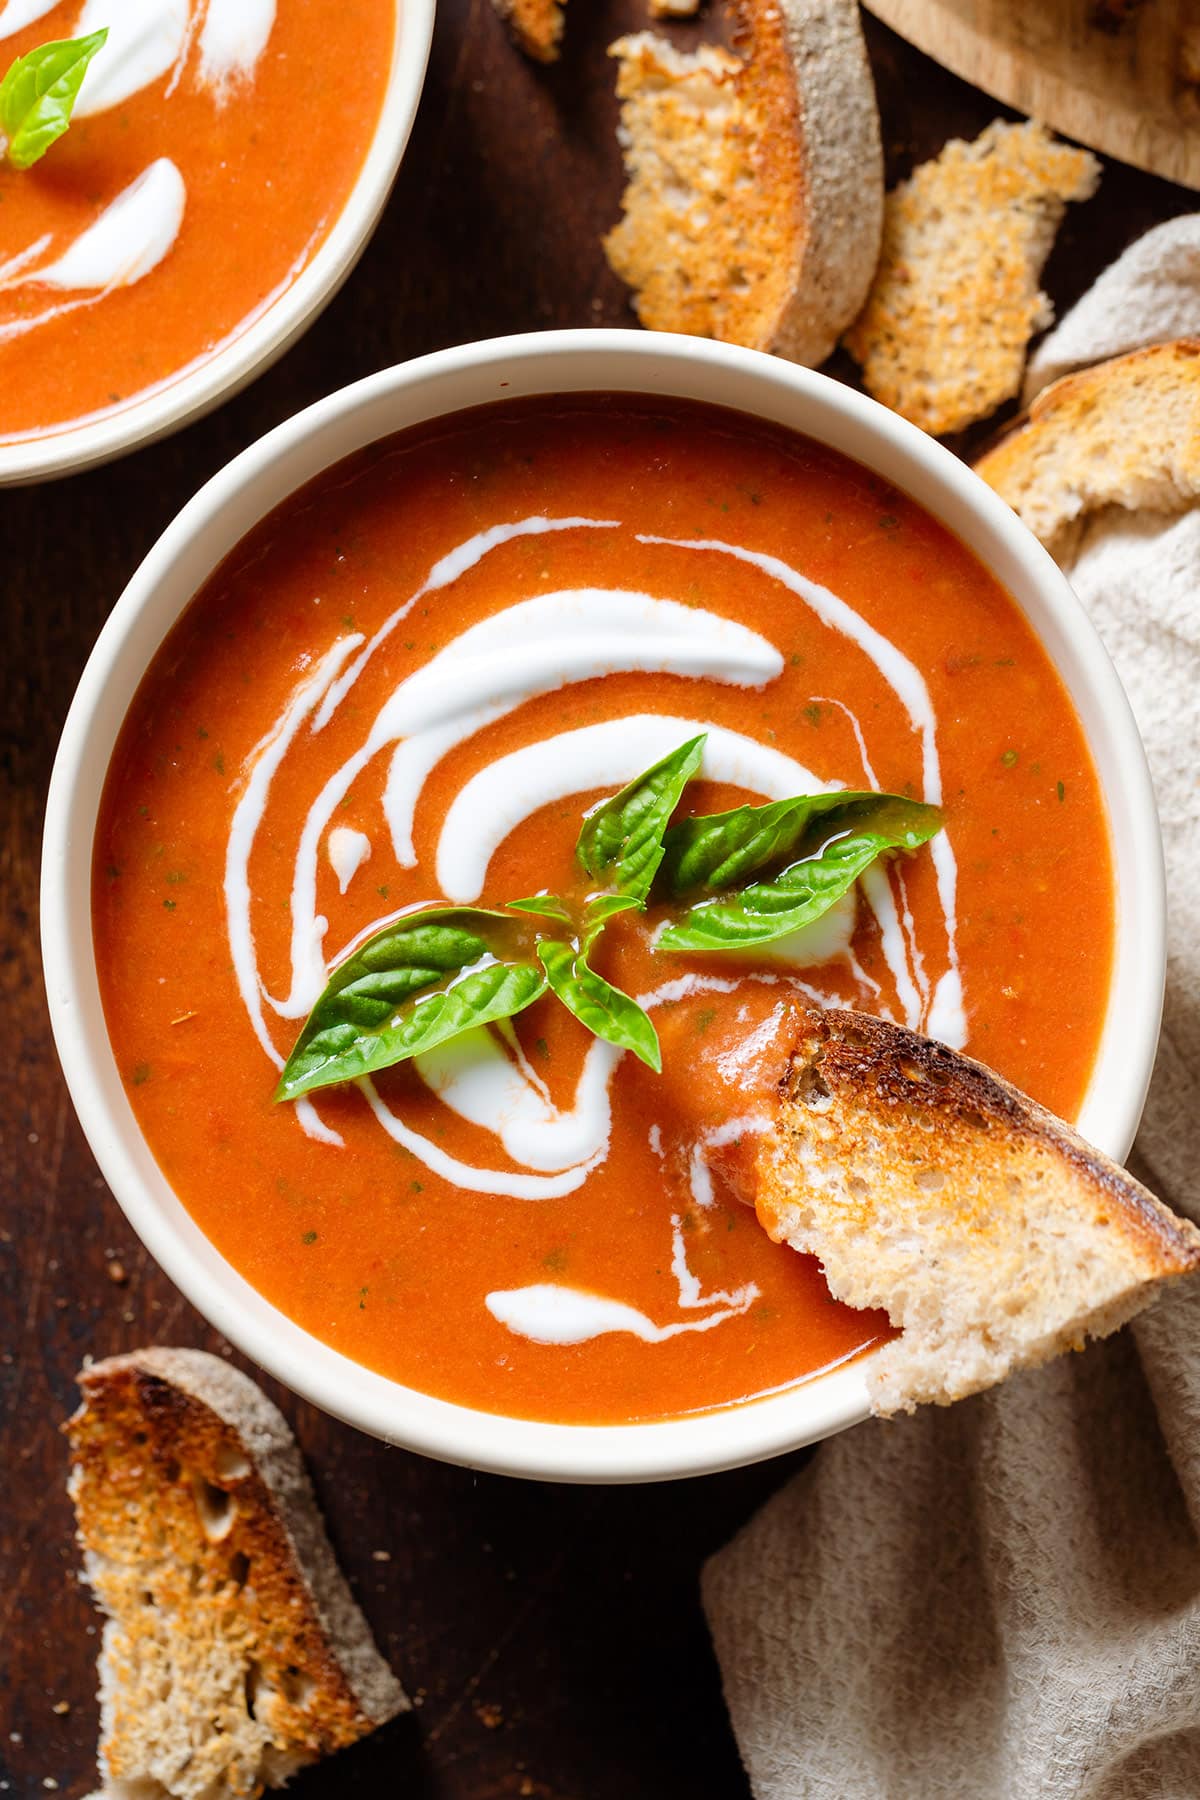 Tomato soup with a drizzle of yogurt in a white bowl garnished with fresh basil and a piece of toasted bread dipped into it.